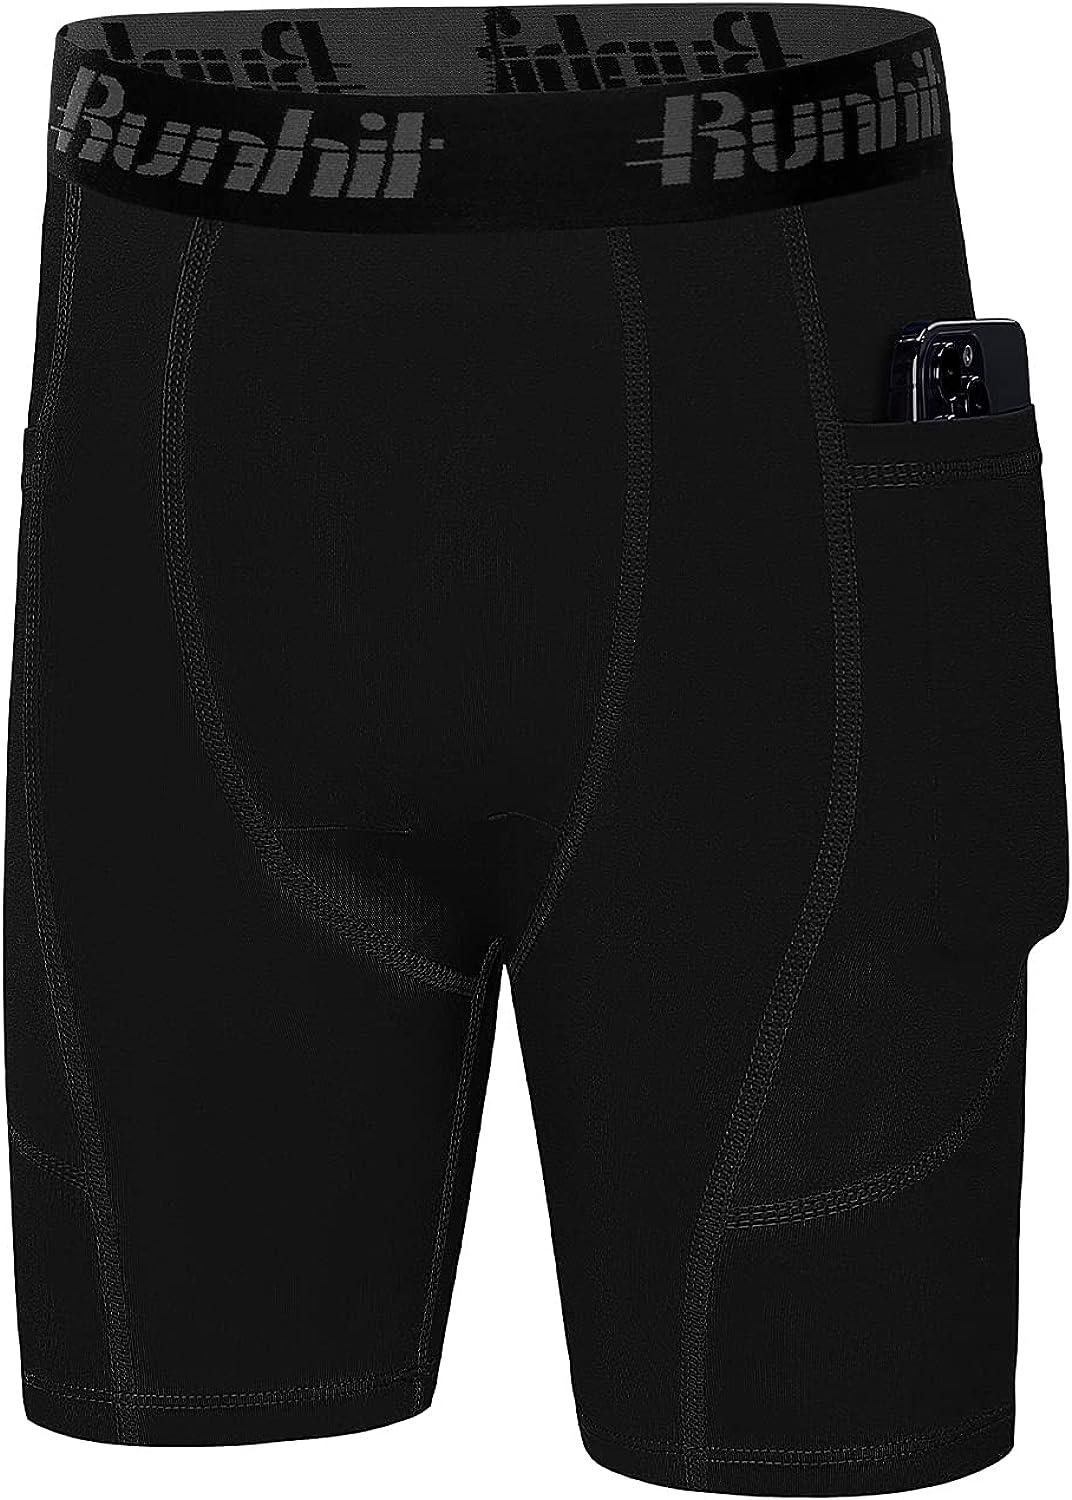 Runhit Youth Boys' Compression Shorts,Boys Performance Athletic Base Layers  Underwear Sports Shorts Side Pocket Black X-Small